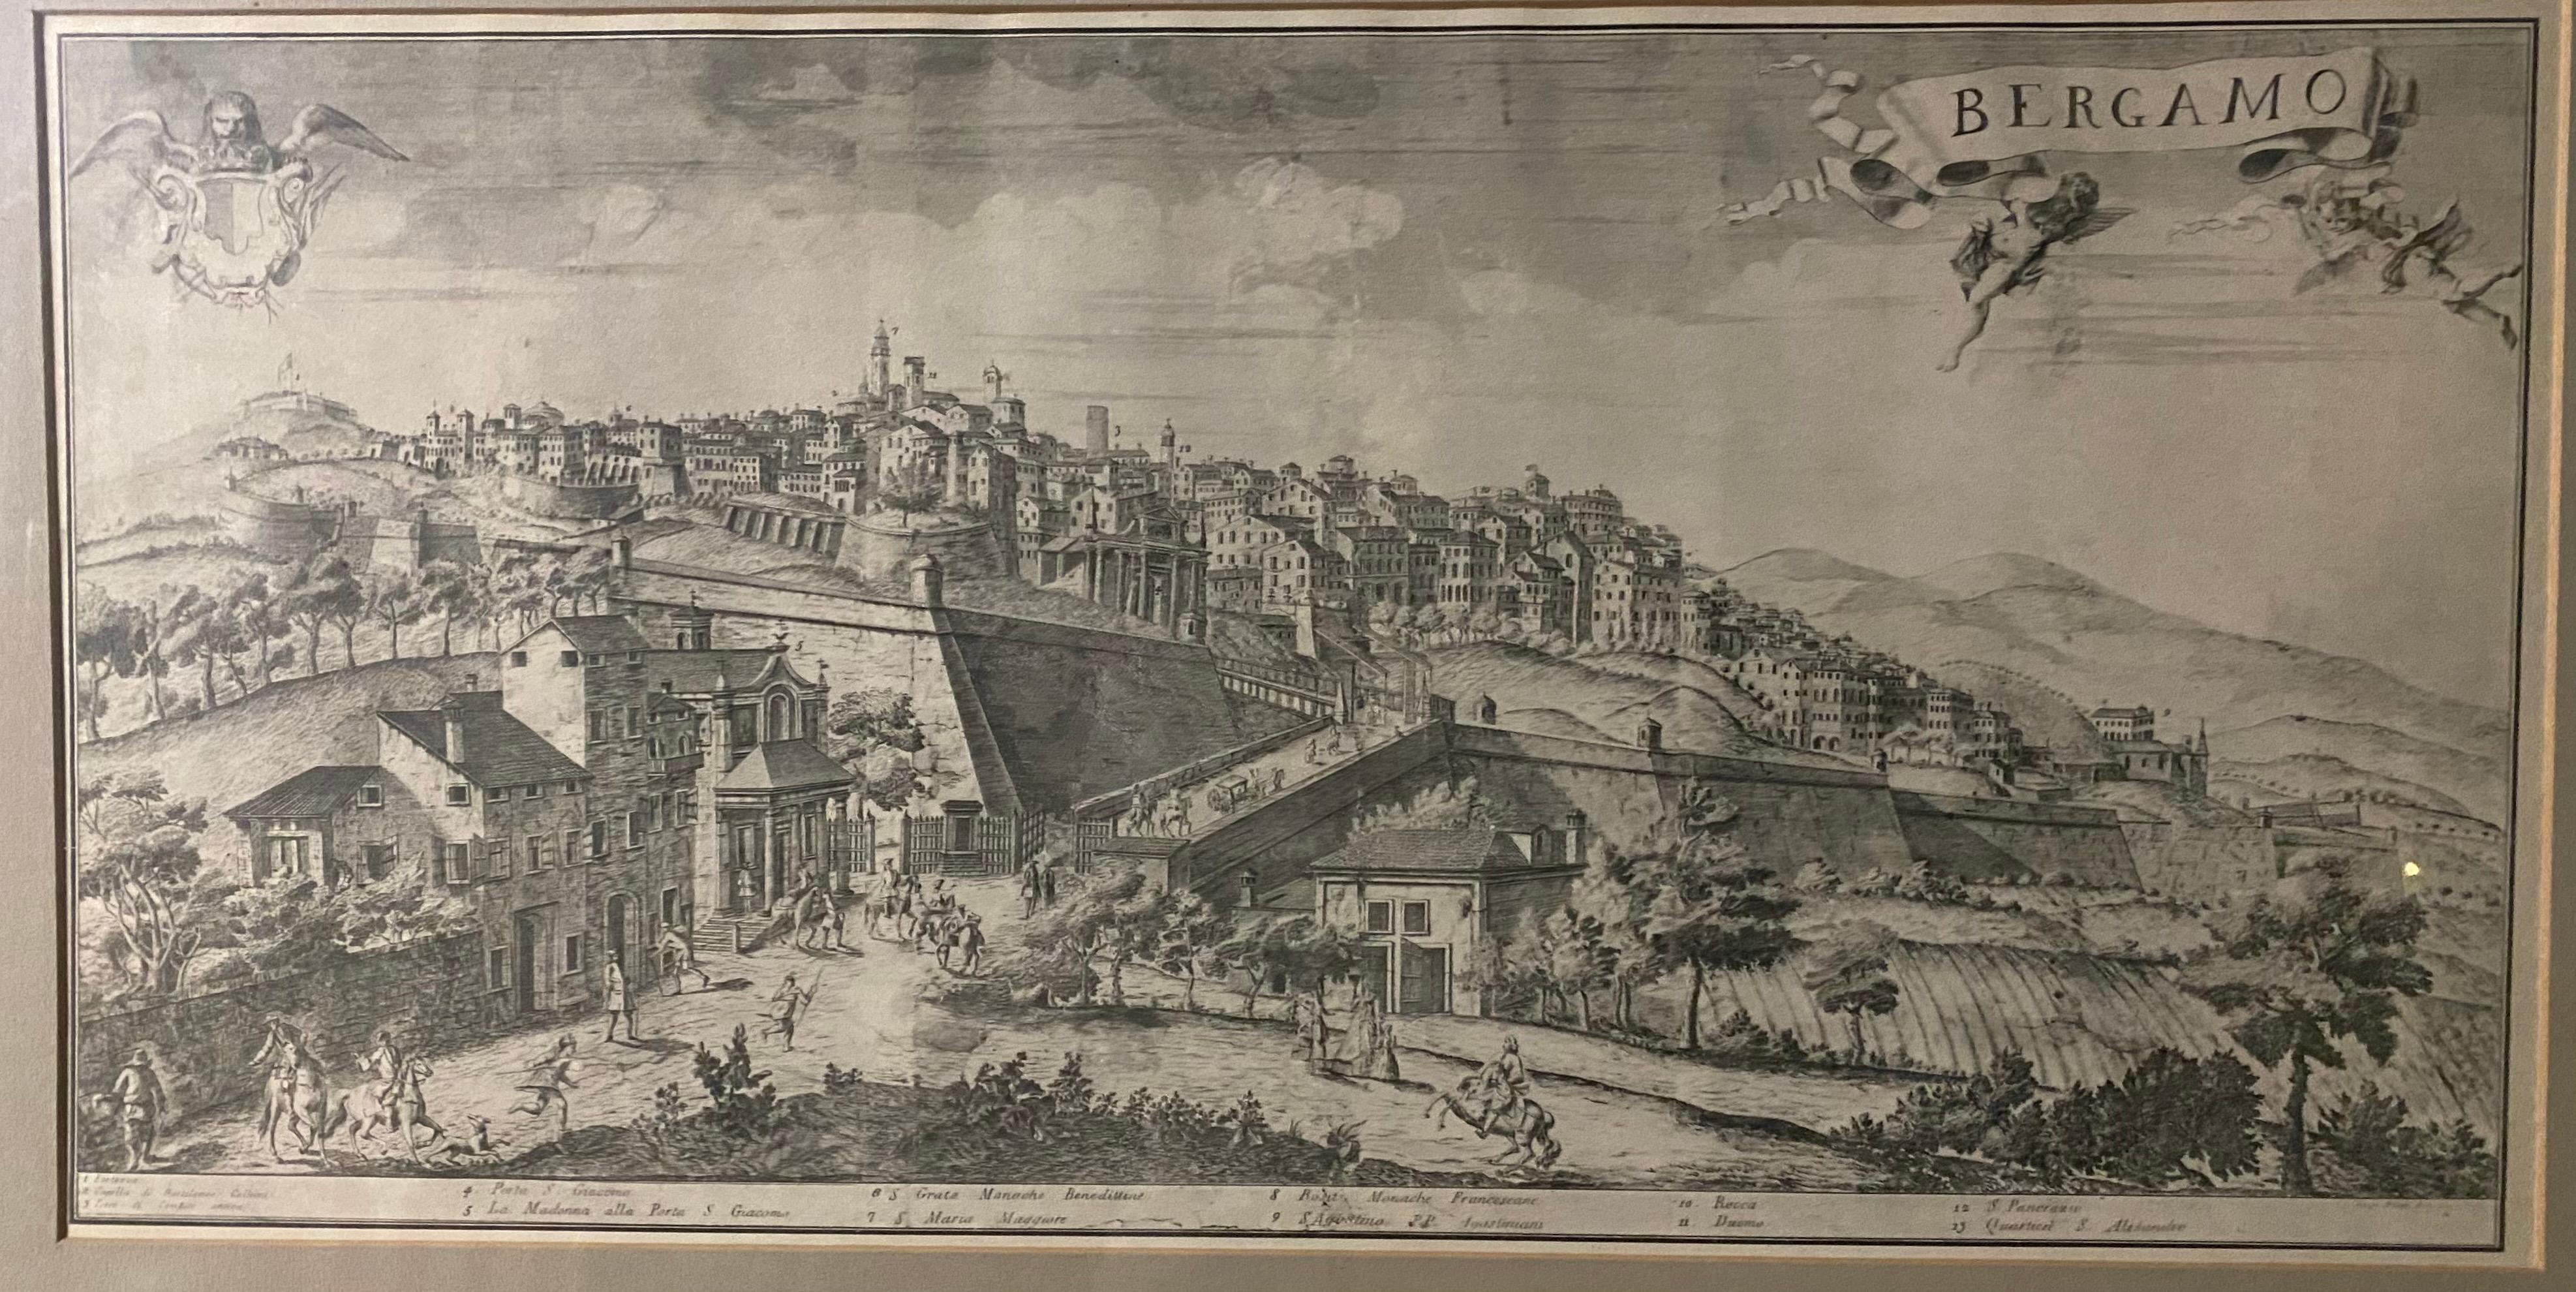 A fine engraving of the ancient City of Bergamo depicting its architecture and historical places of interest. Nicely matted and framed.
Search term: art, painting. lithograph.